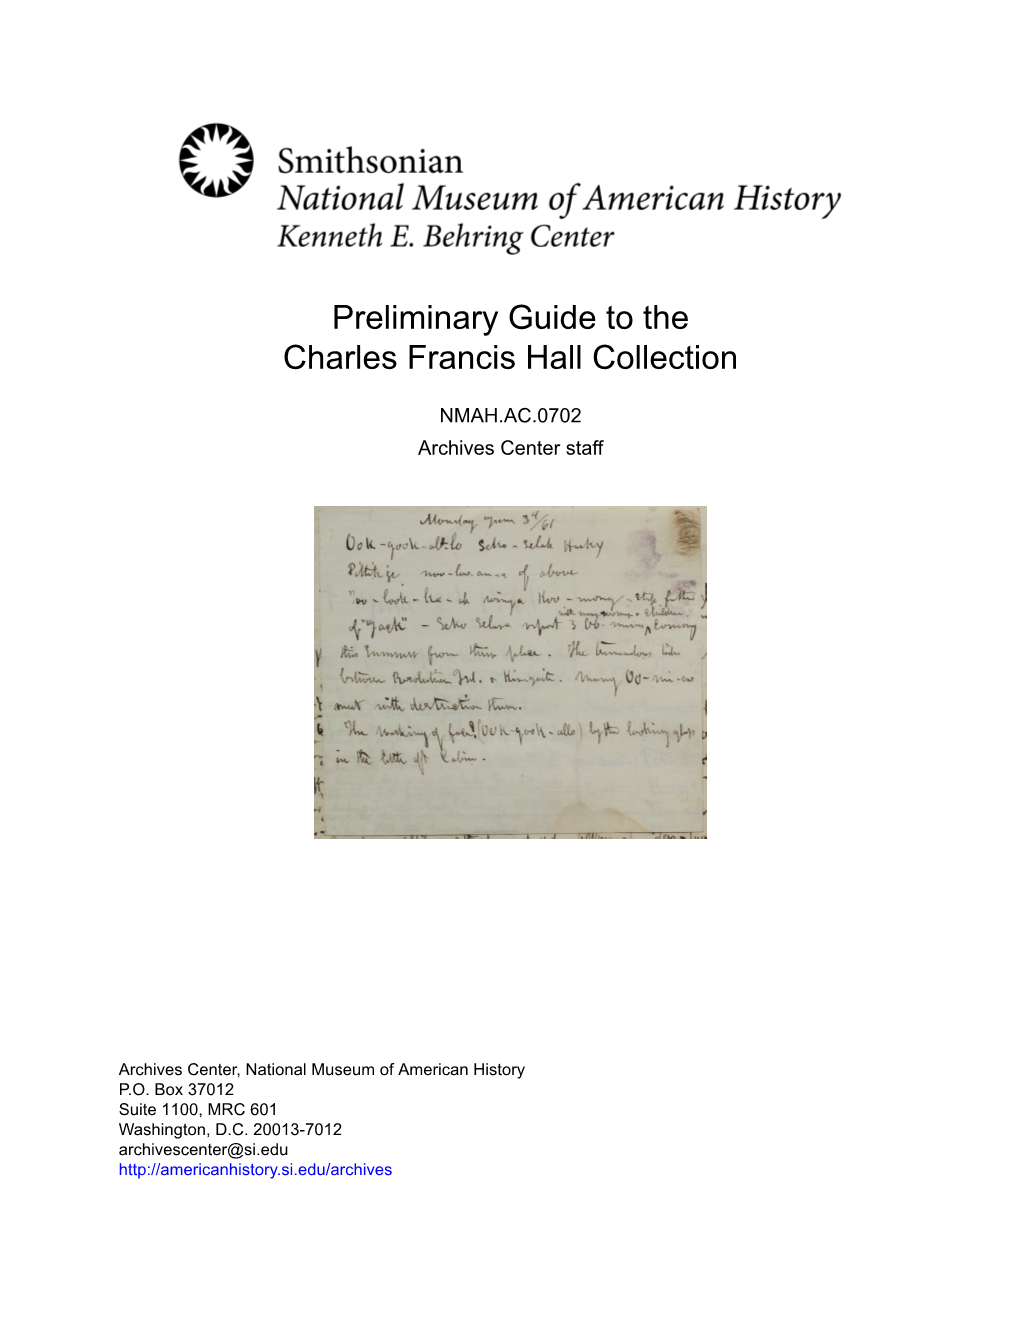 Preliminary Guide to the Charles Francis Hall Collection